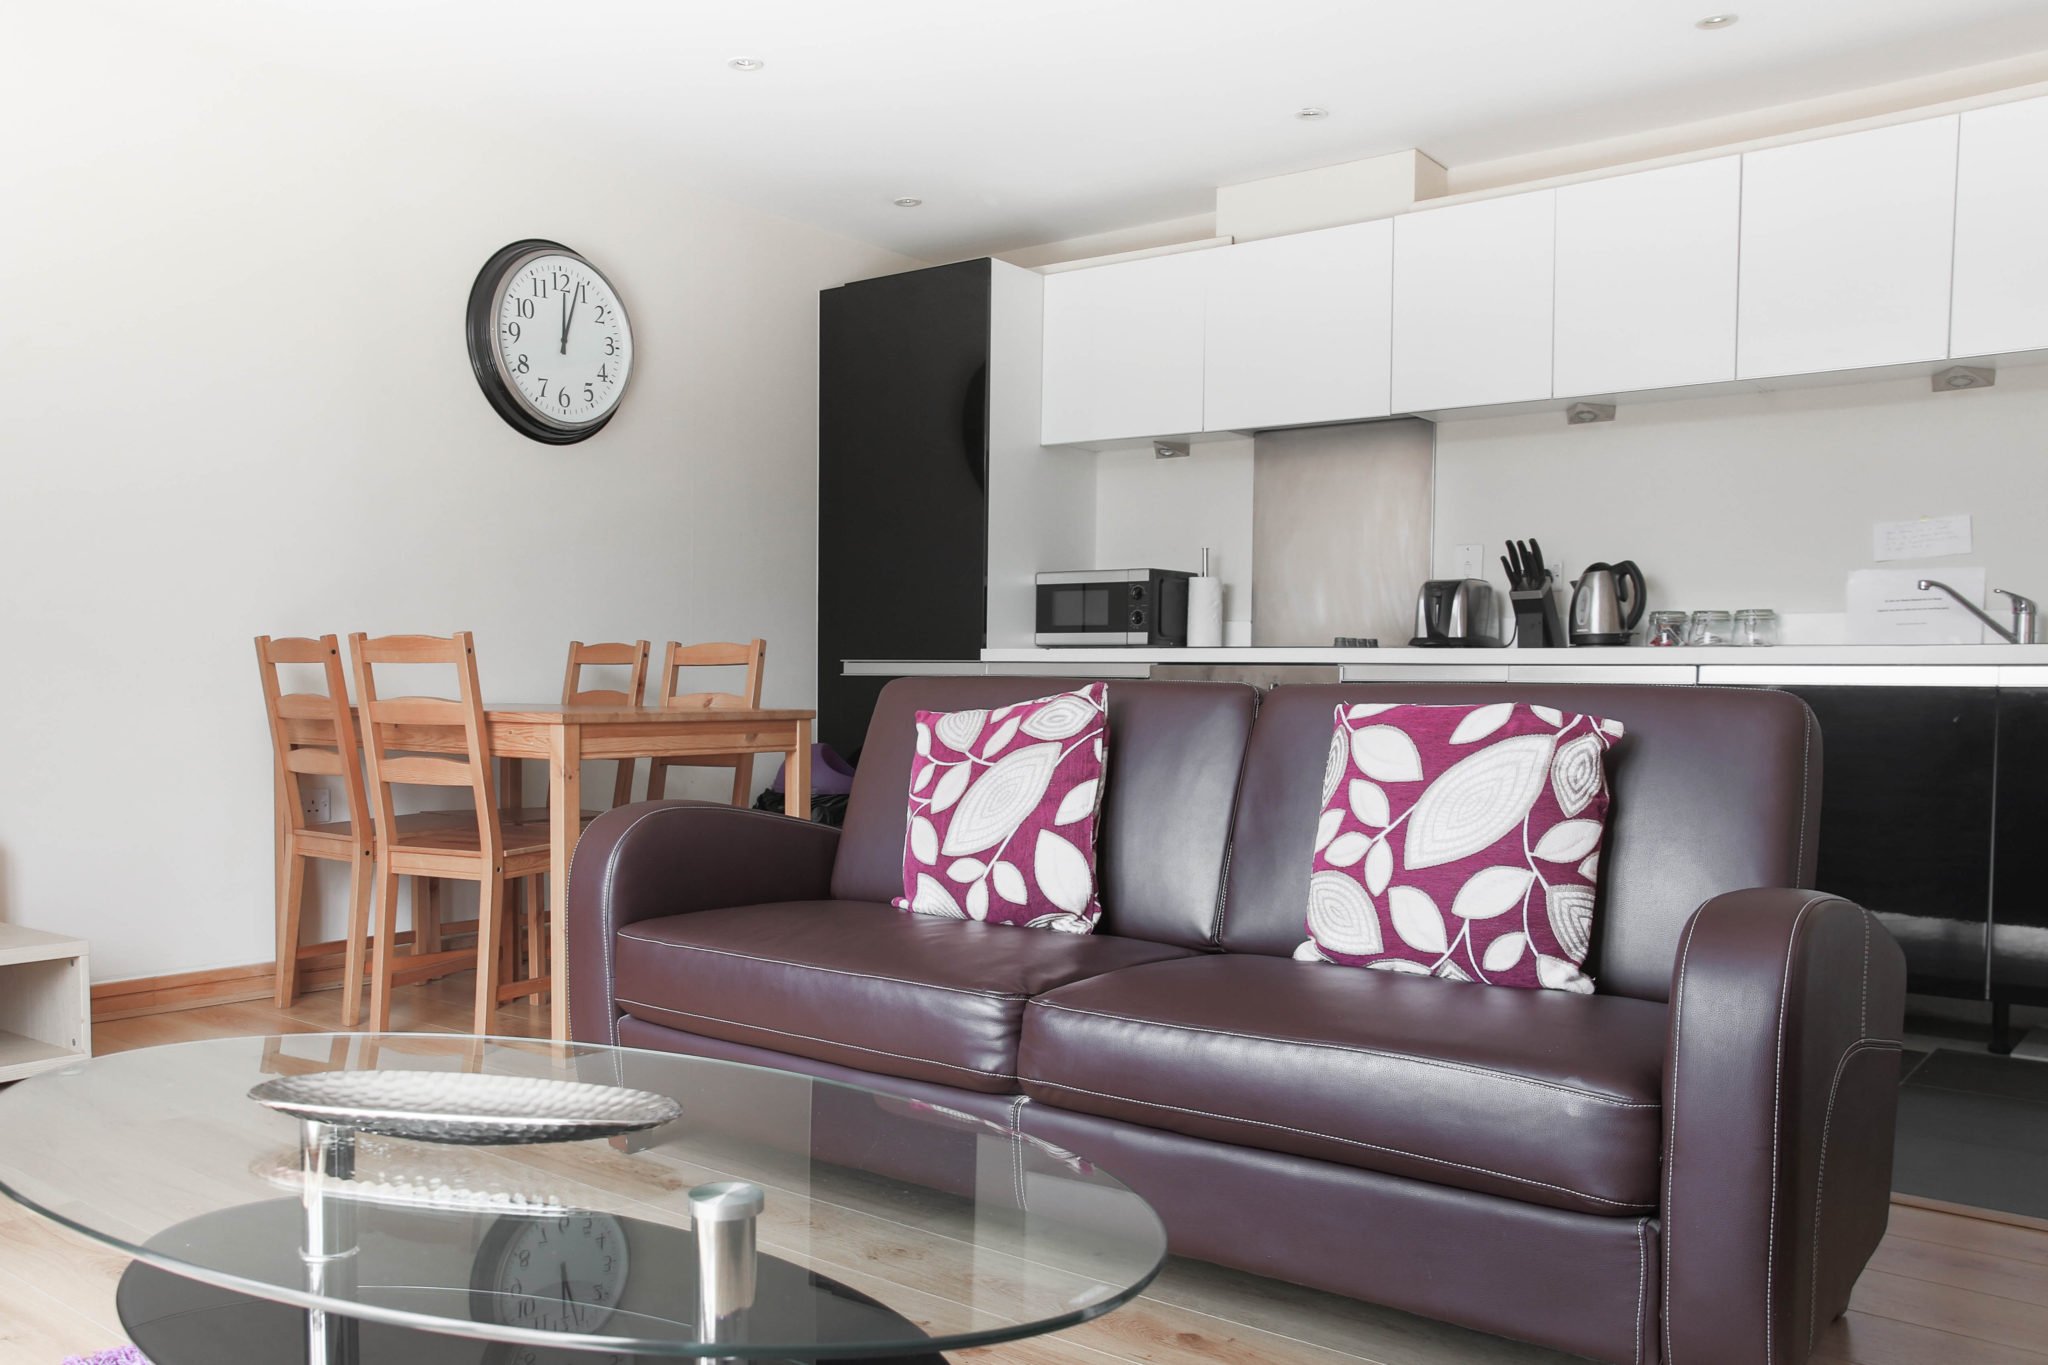 Corporate-Accommodation-Guildford-|-Hampshire-Serviced-Apartments-UK-|-Short-Lets-&-Serviced-Accommodation-Guildford-|-All-Bills-Incl-|-BEST-RATES--BOOK-NOW---Urban-Stay